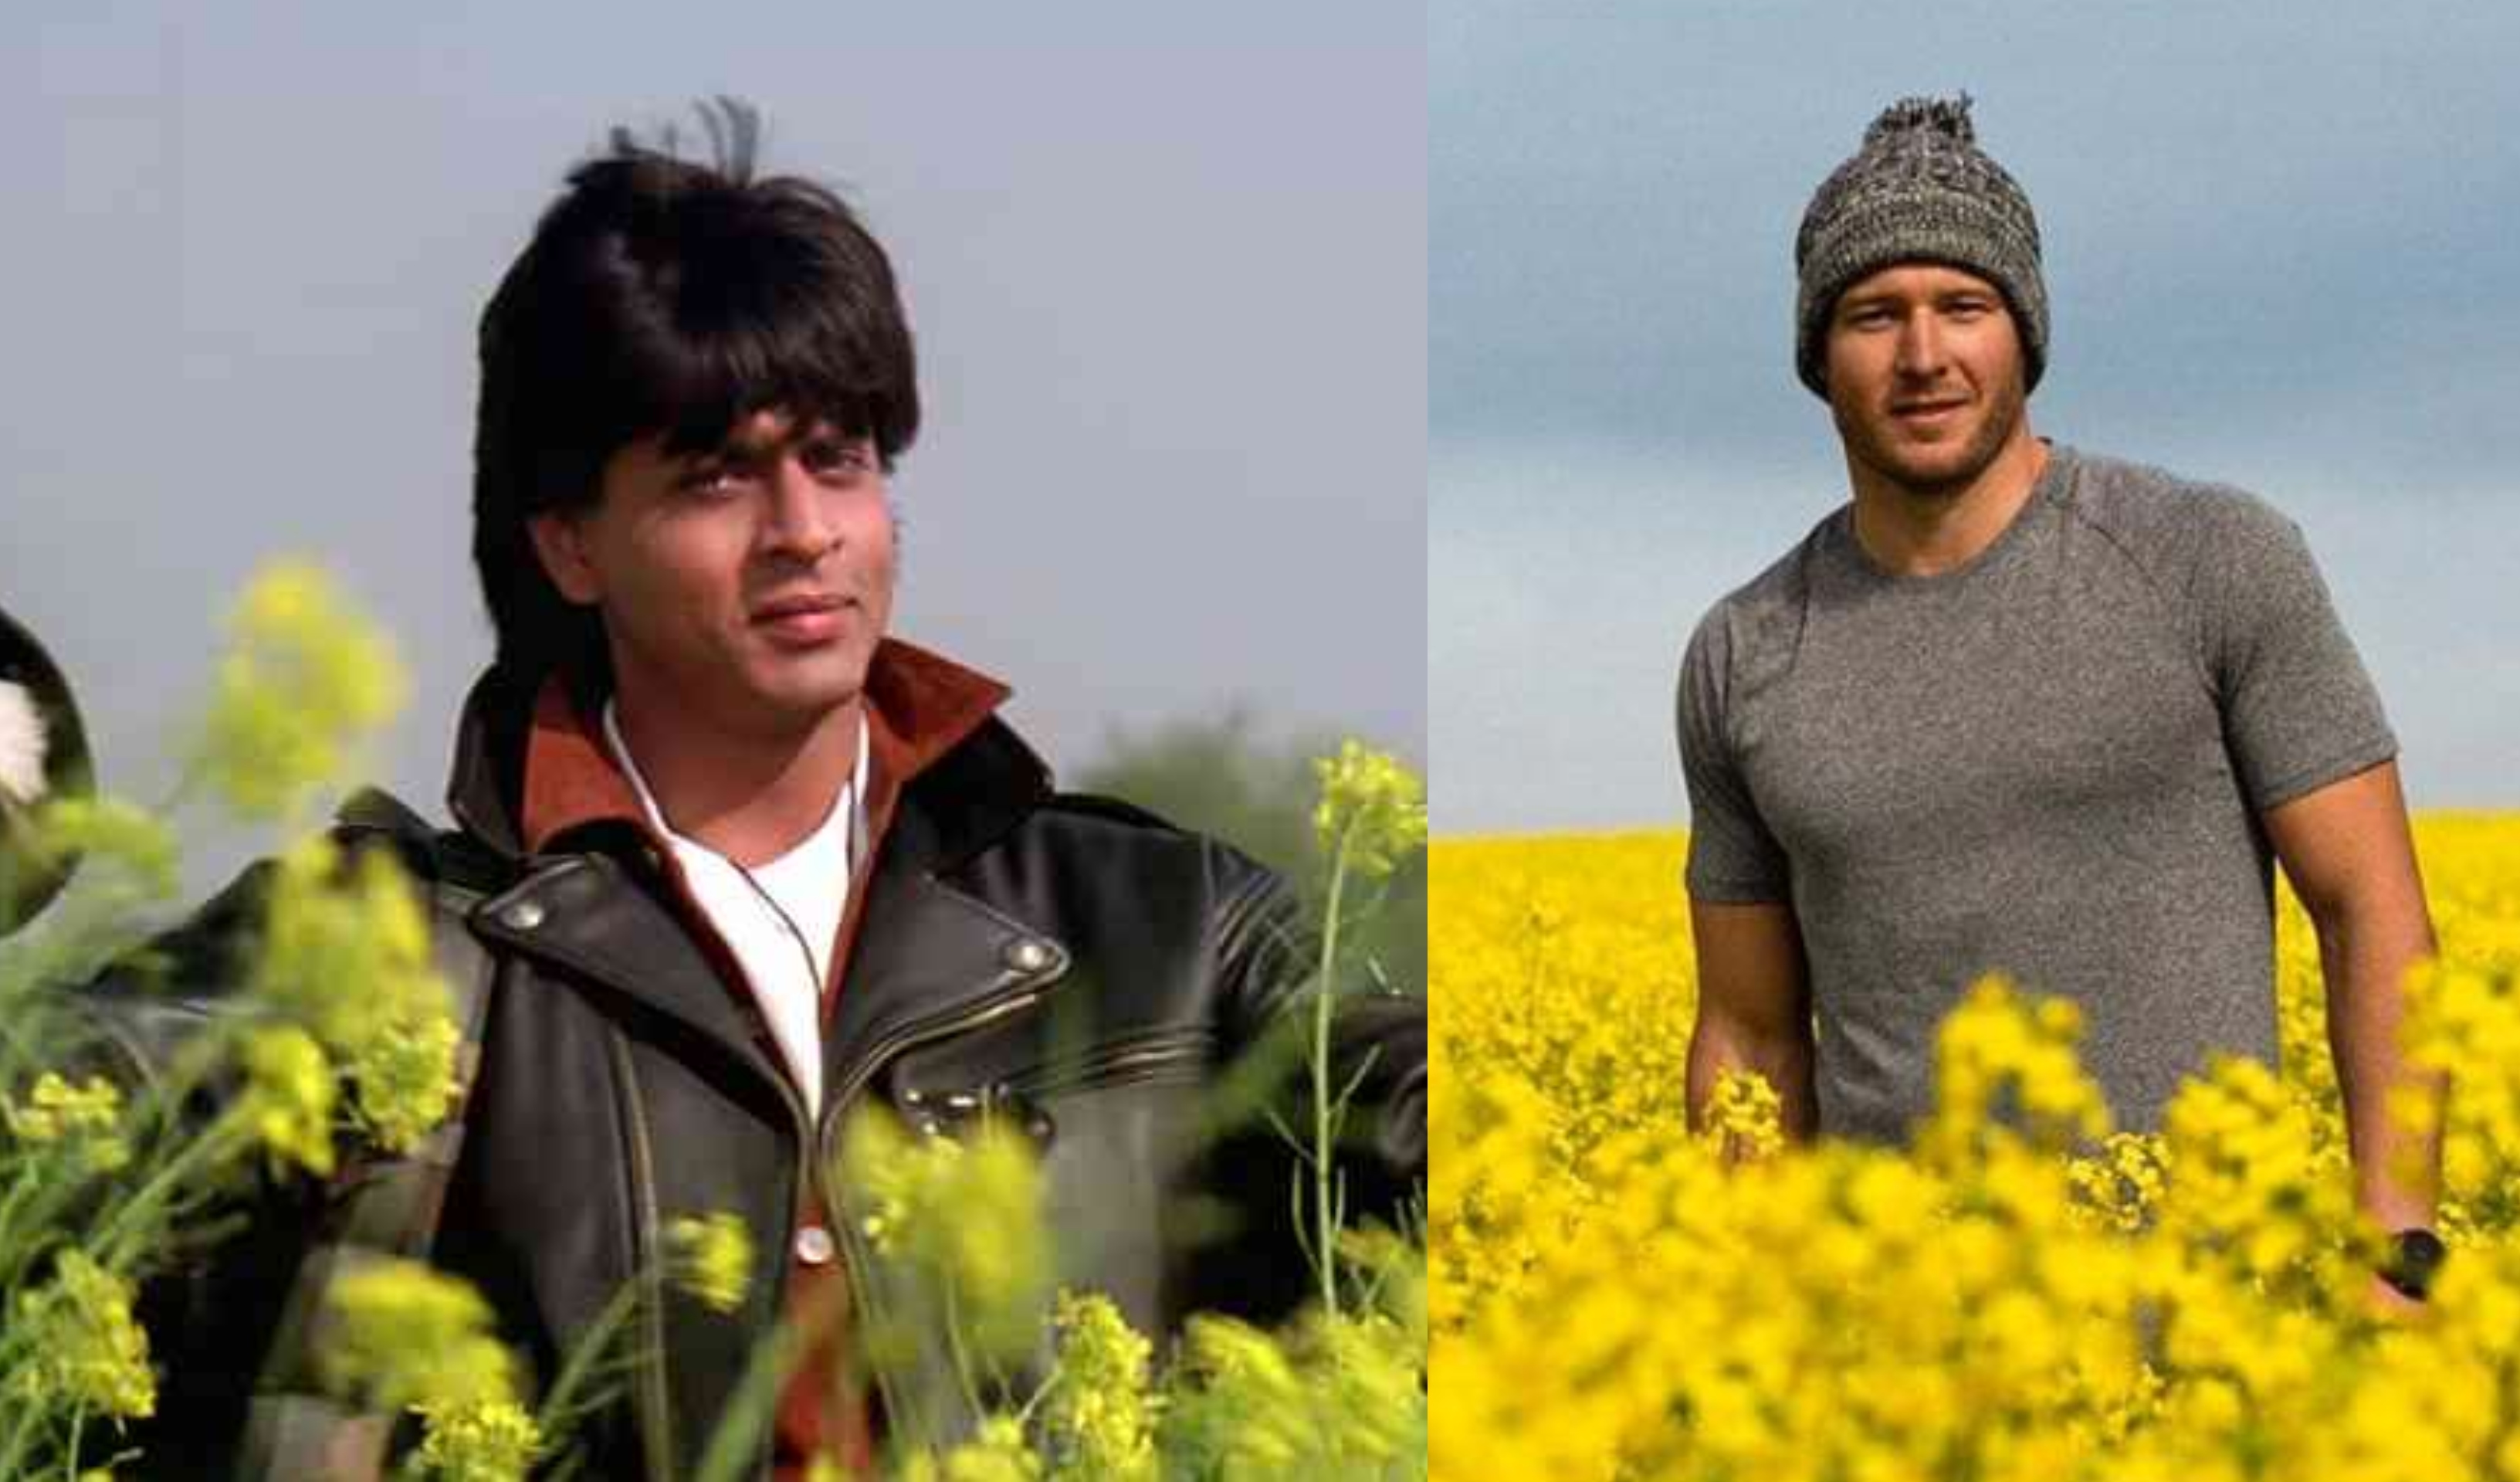 Shahrukh KHAN Lovers - From his ponytail to his leather jacket in DDLJ From  his geeky look in'MHN'to his braided look in Don 2 SRK HAS ALWAYS BEEN A  TREND SETTER. SHARE